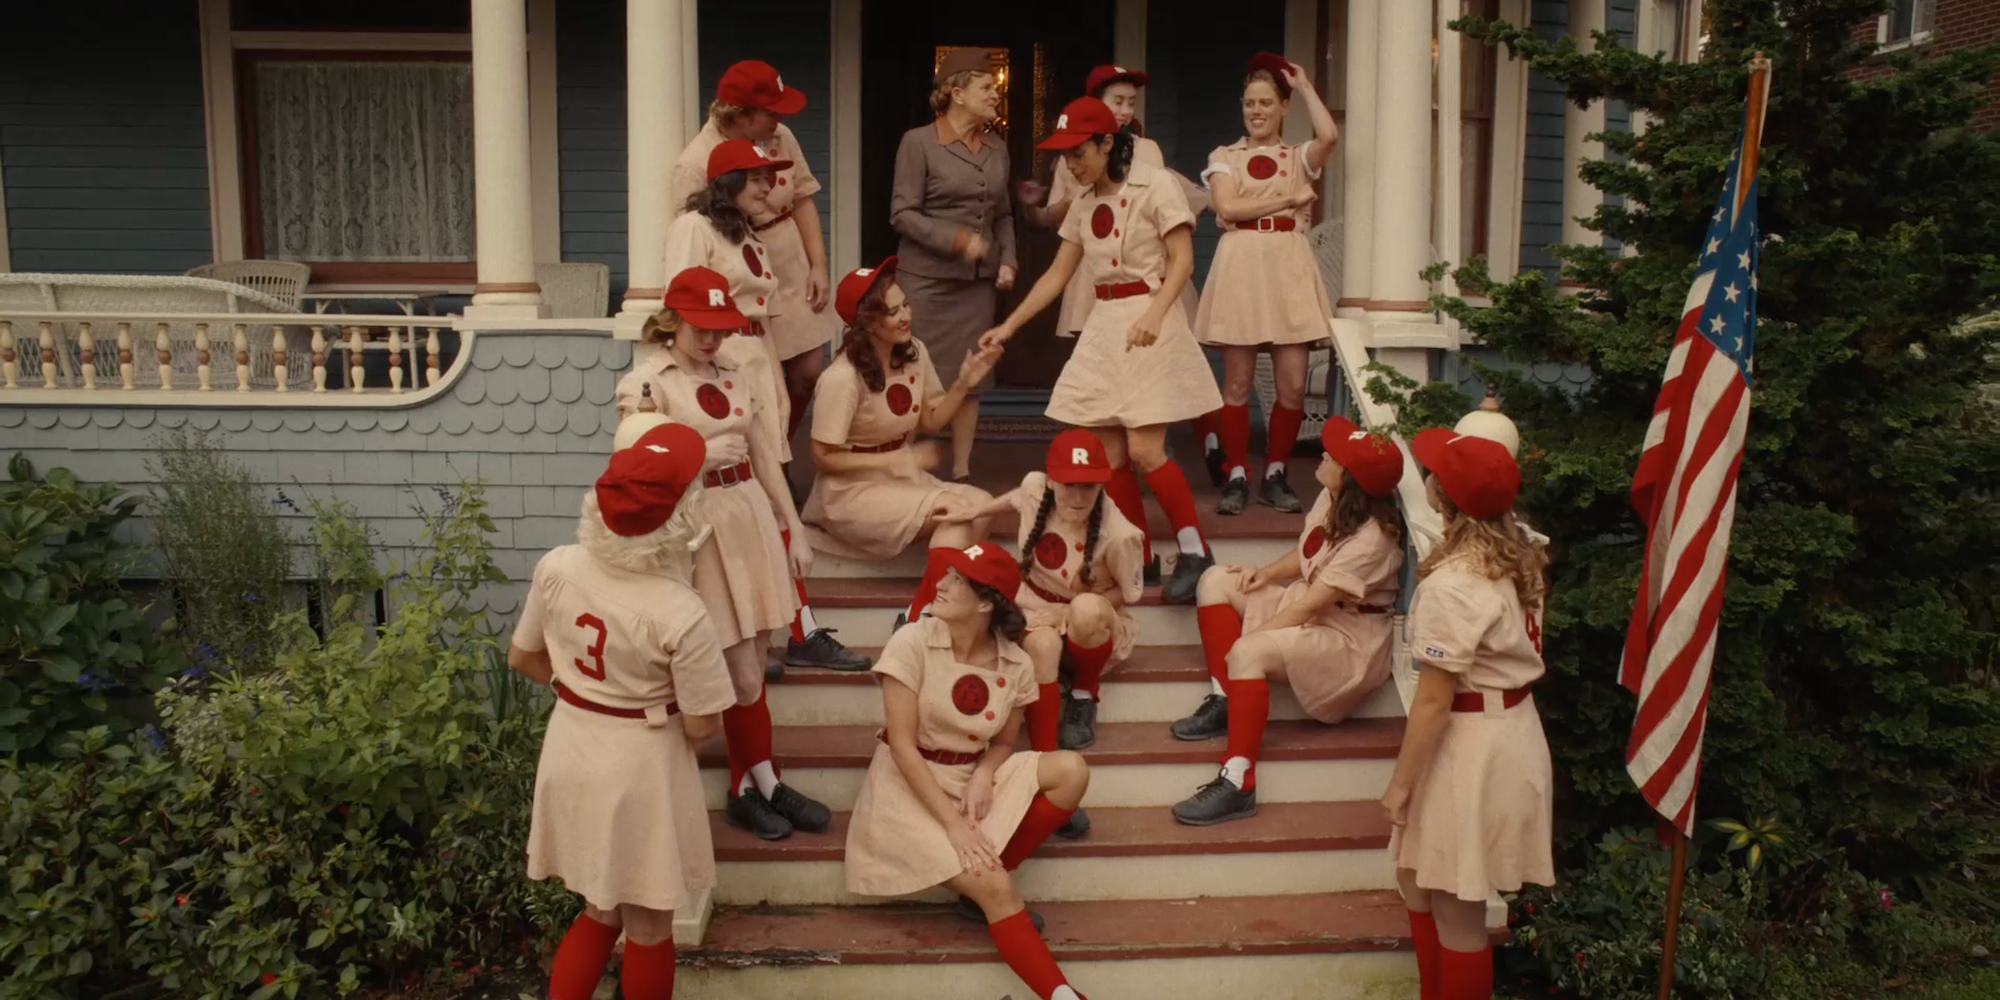 A group of women dressed in old-fashioned baseball uniforms sit on the steps of a house